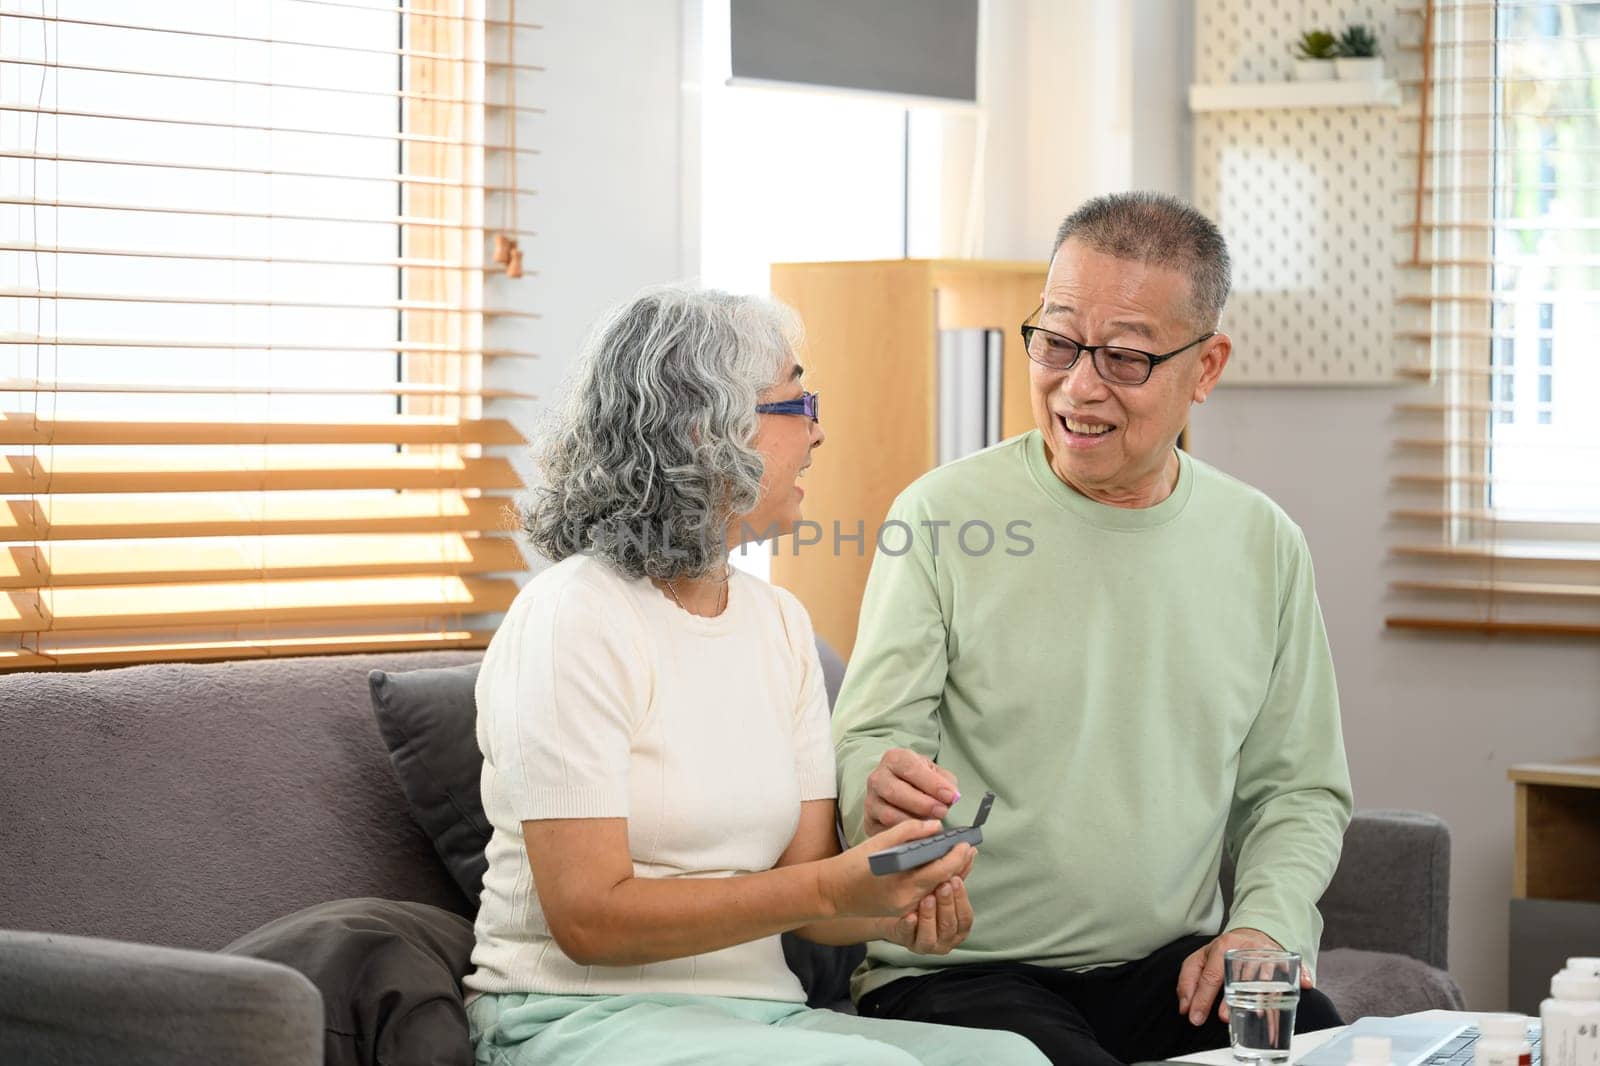 Elderly couple taking daily supplements or medications from a pill organizer box.